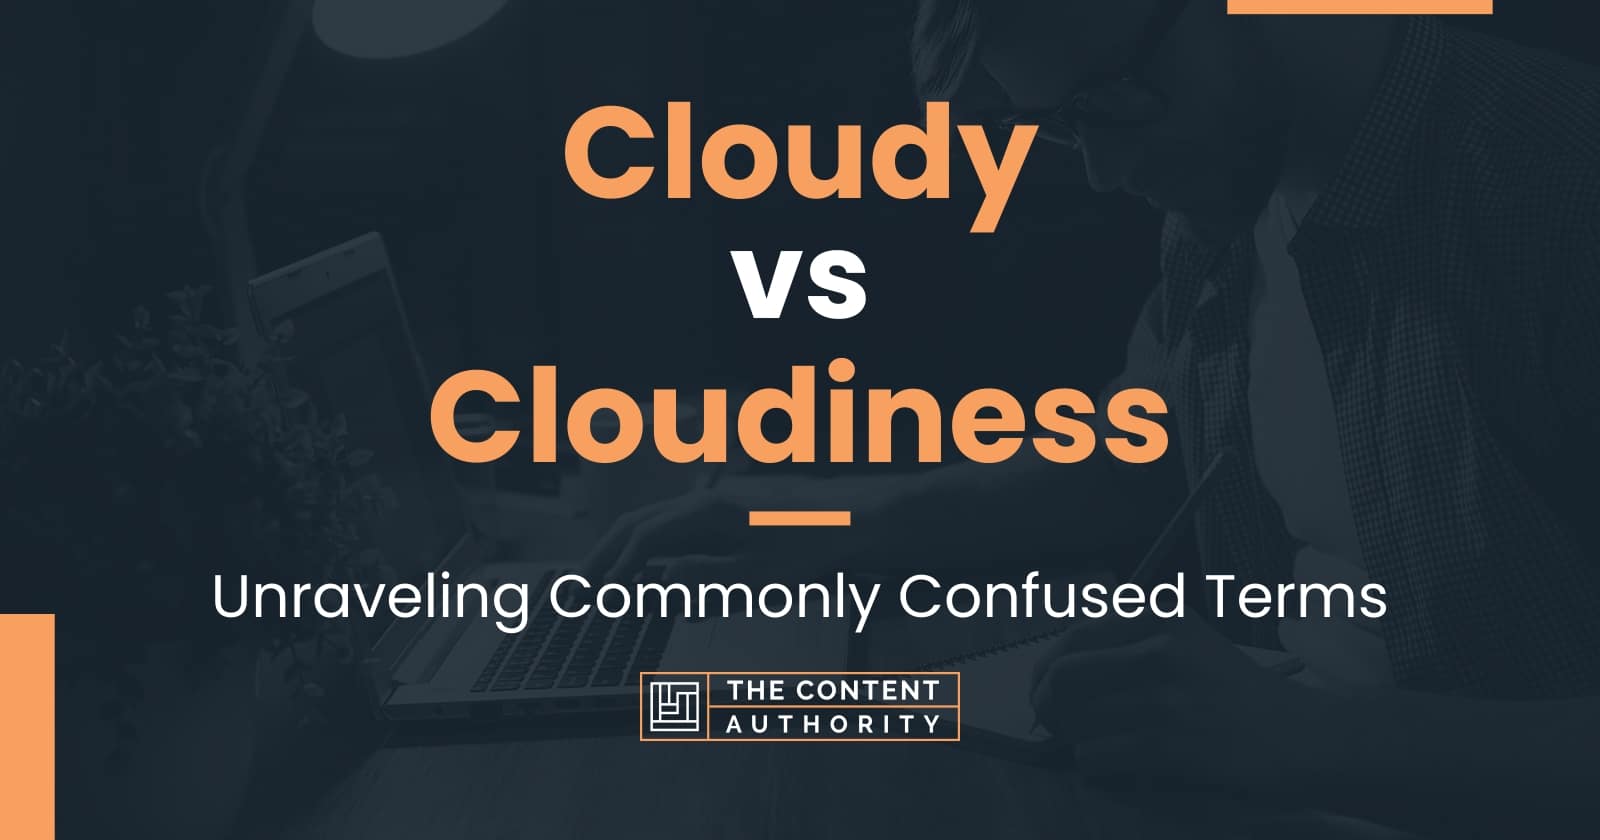 Cloudy vs Cloudiness: Unraveling Commonly Confused Terms